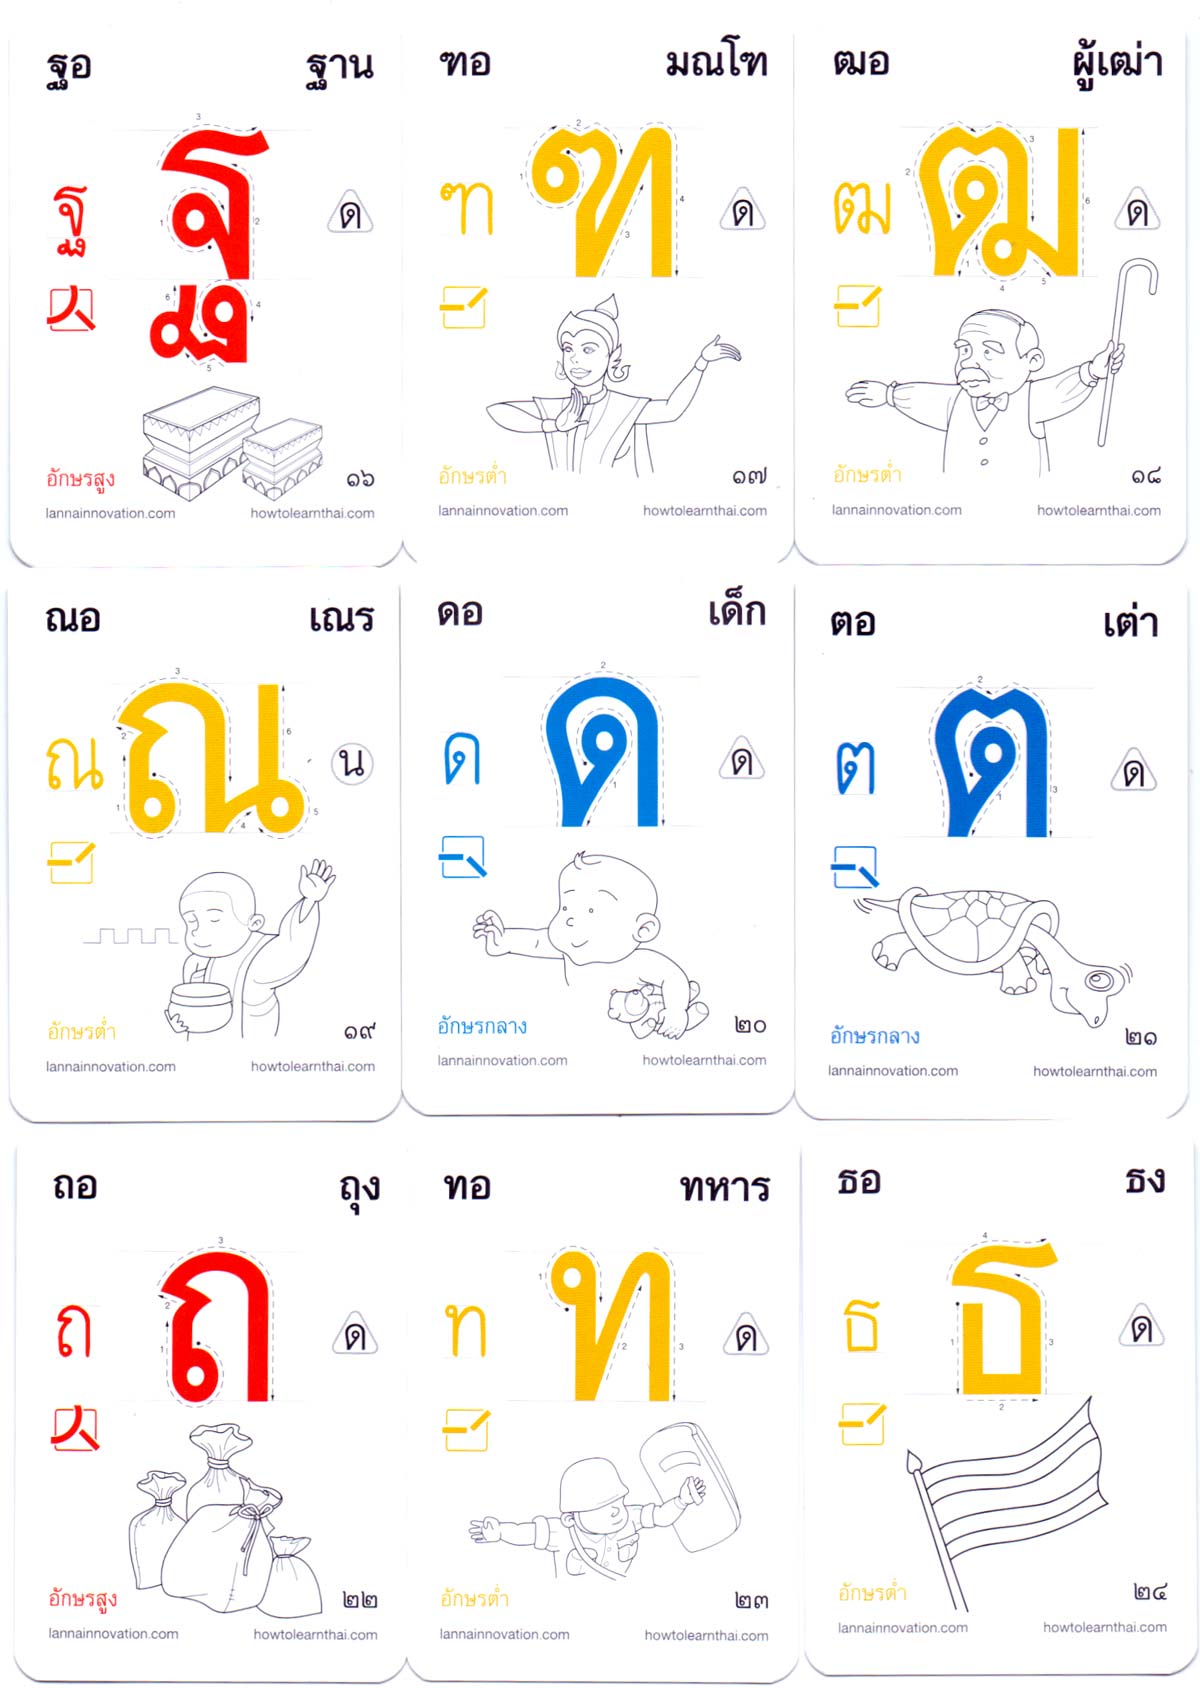 “Learn Thai” cards published by Lanna Innovation Co. Ltd, 2009